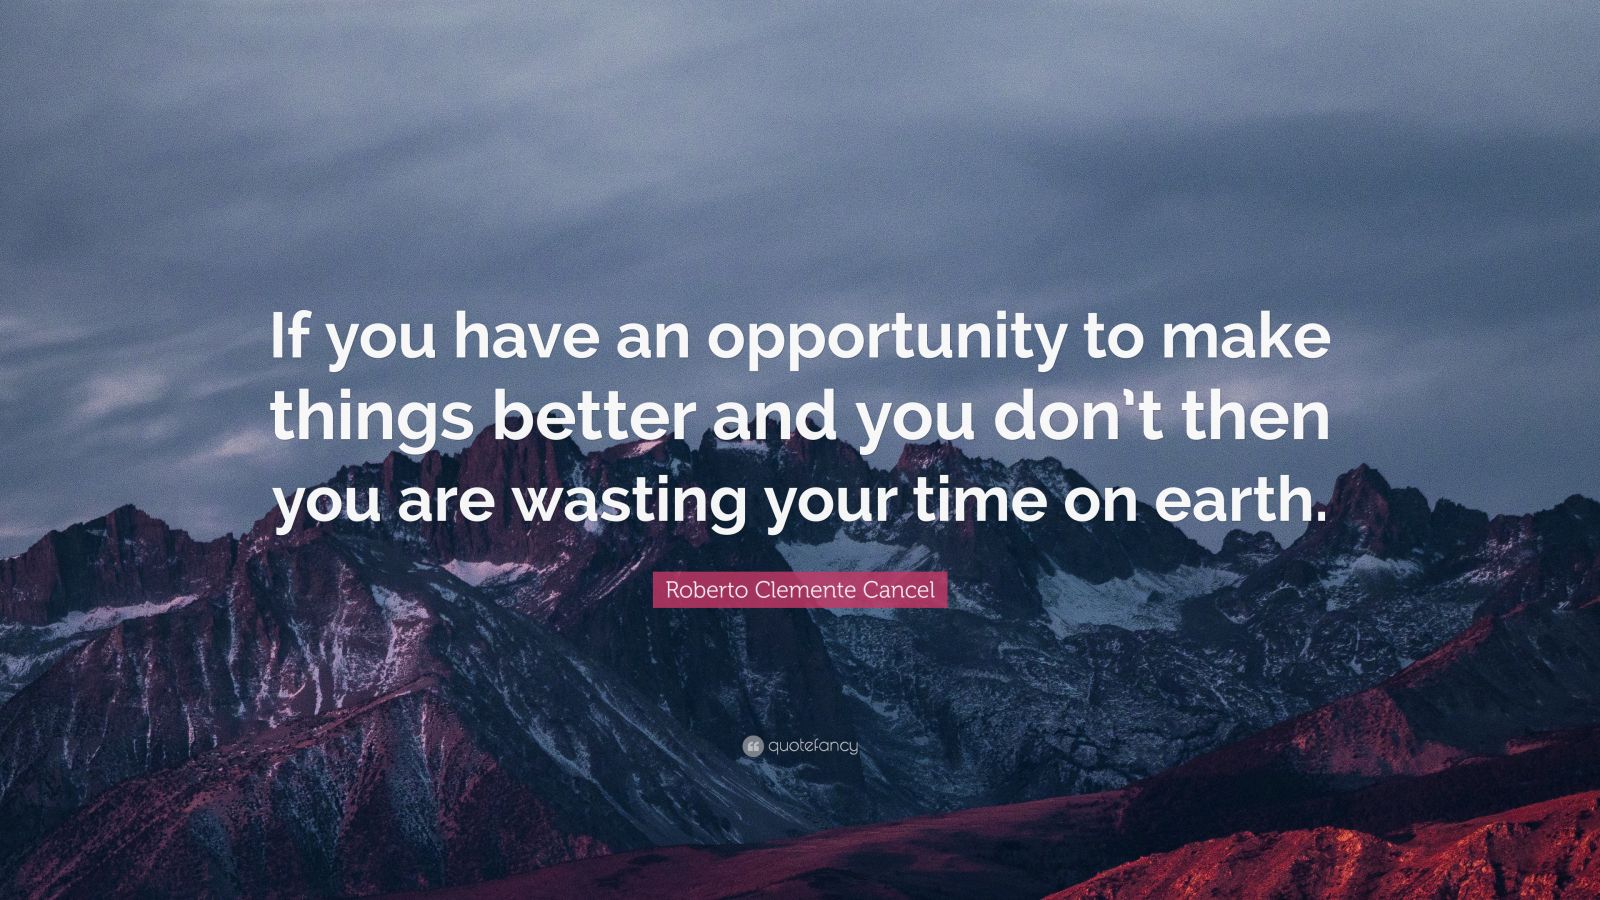 If you have an opportunity to make things better and you don't